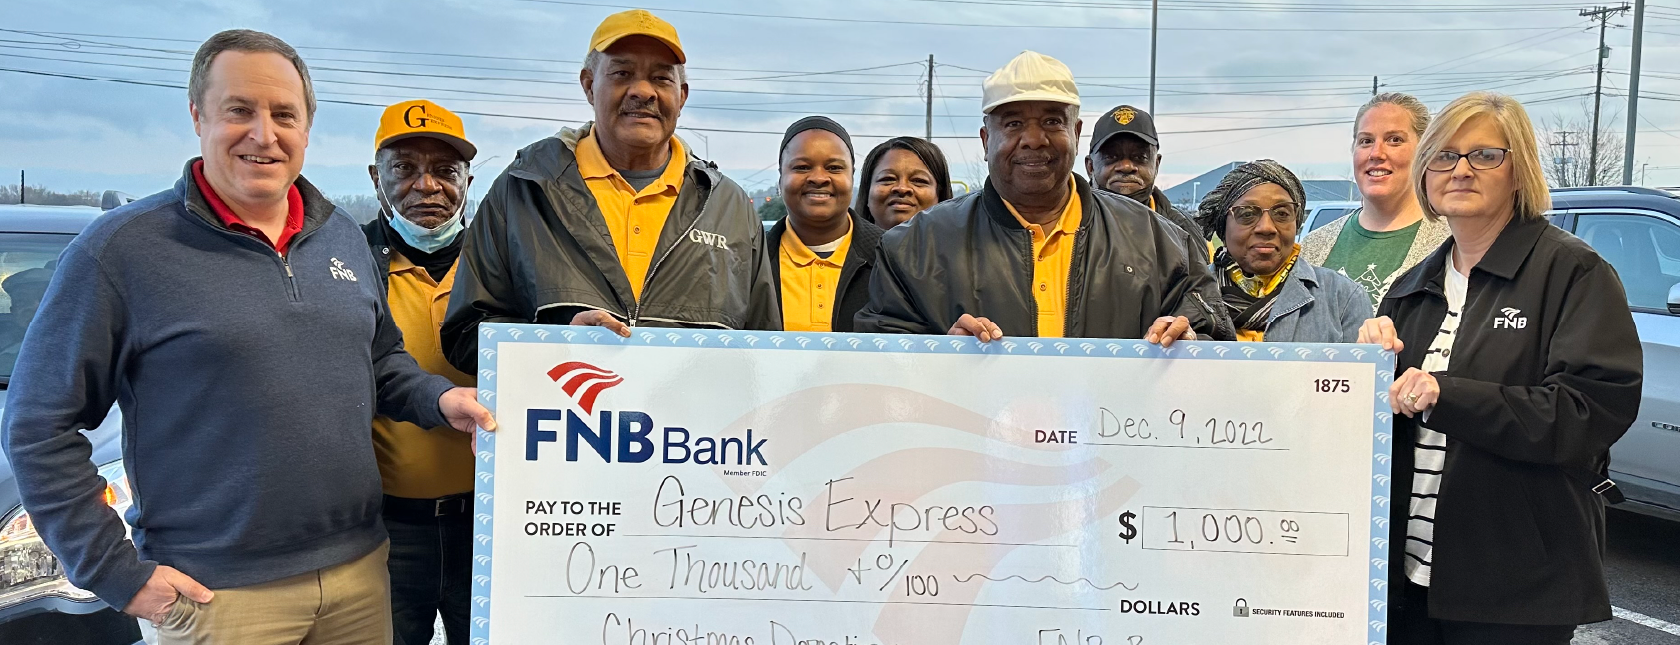 FNB Makes $1,000 donation to Genesis Express in cadiz